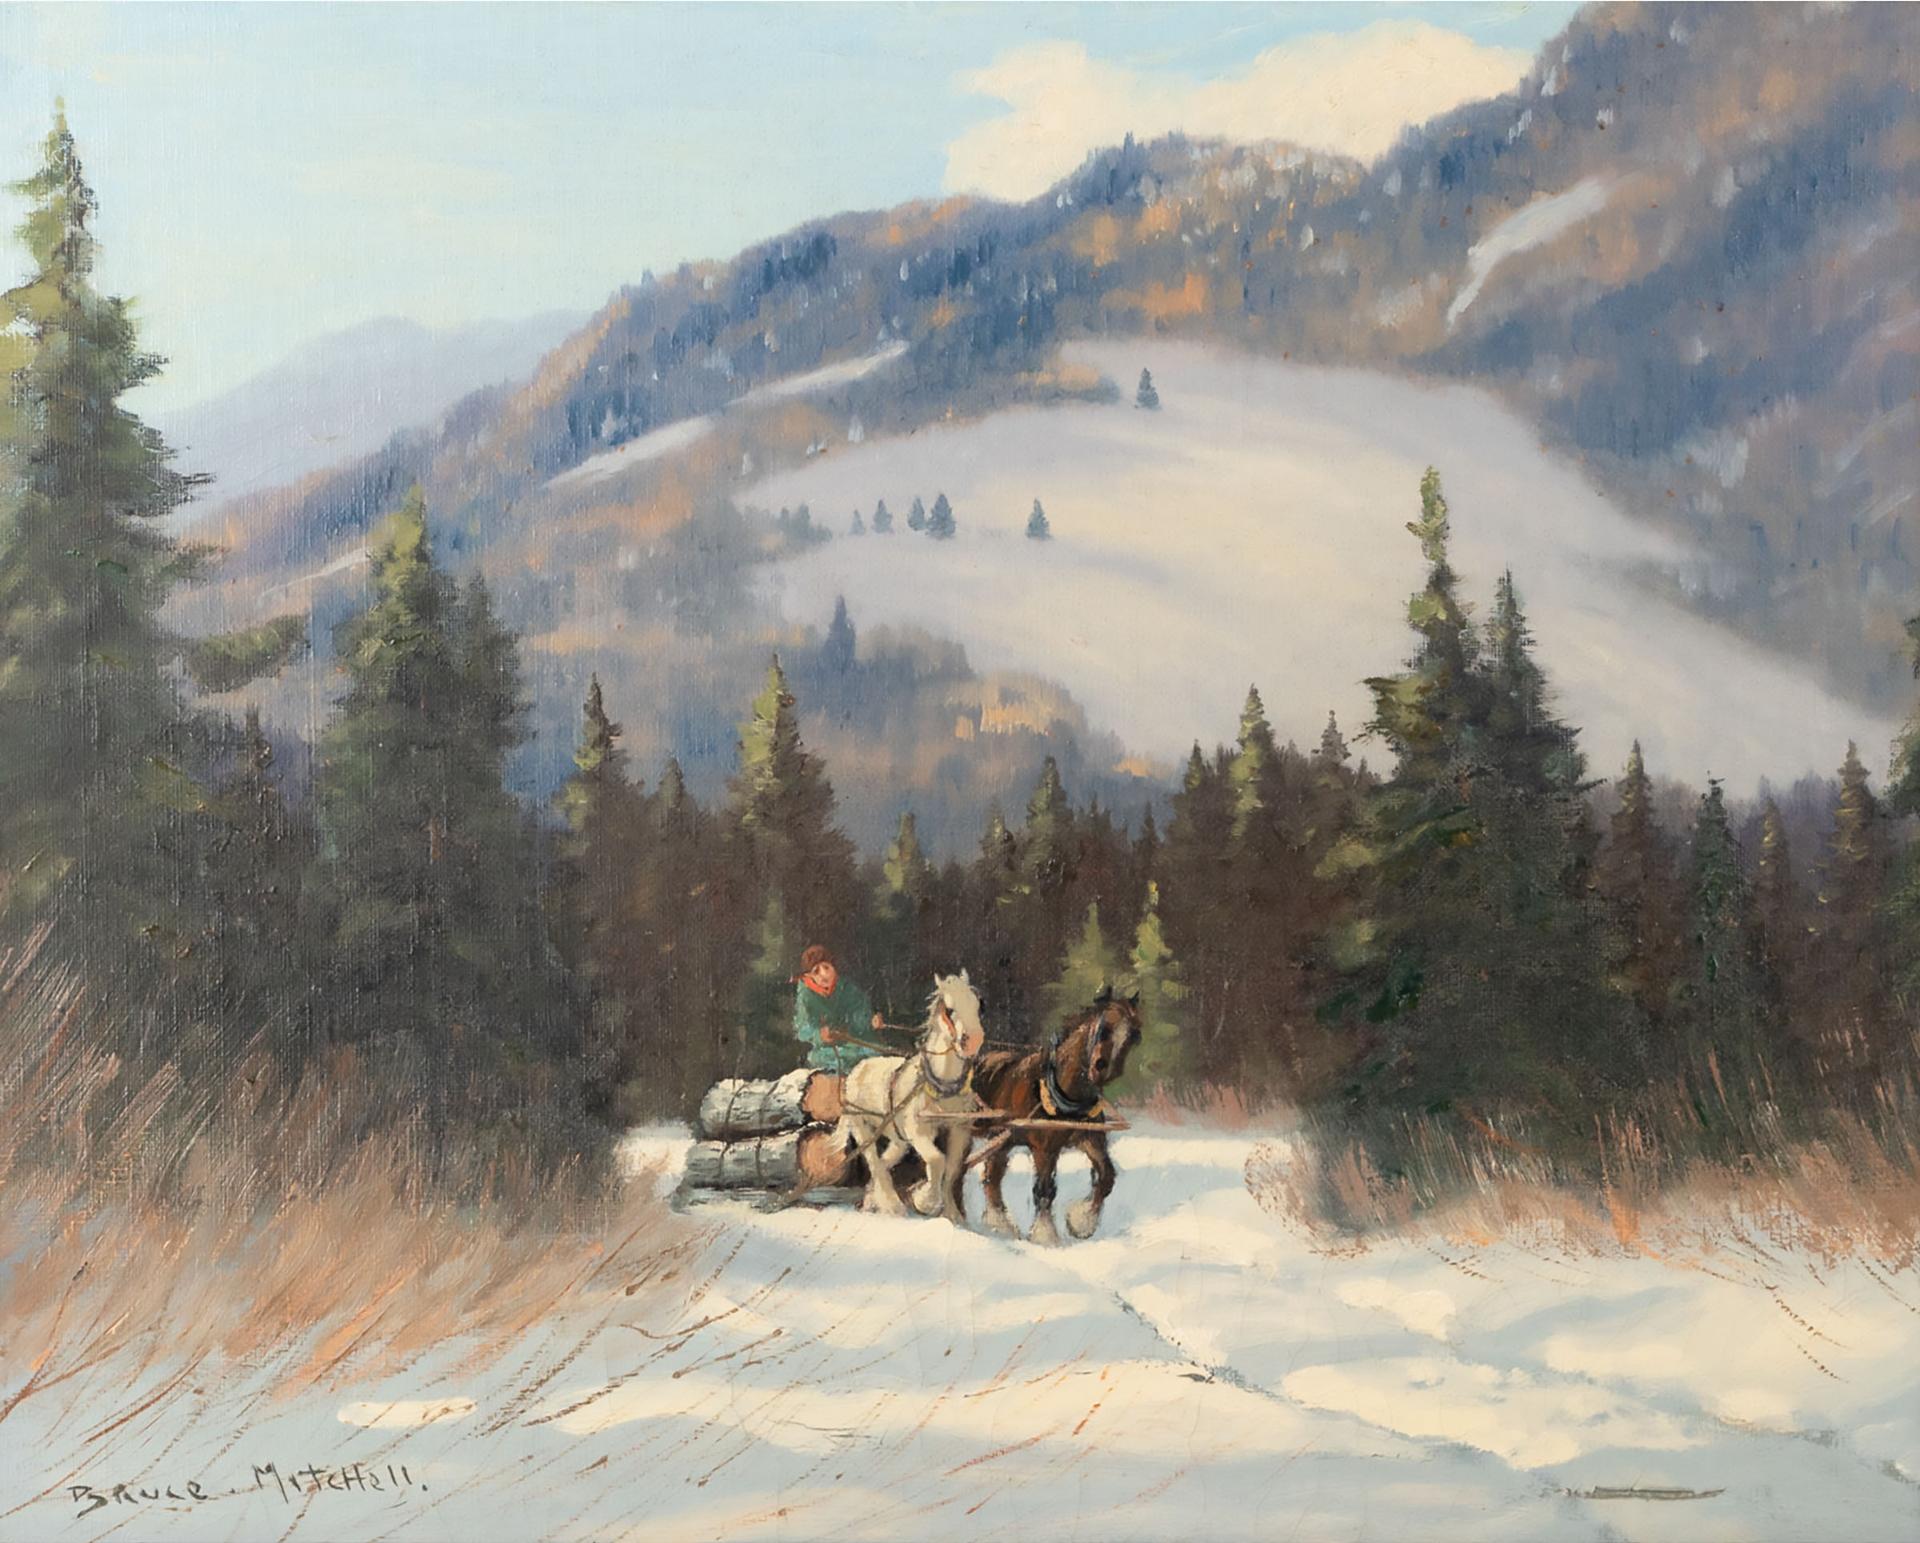 Bruce Mitchell (1912-1995) - Untitled (Hauling Logs Through The Snow)